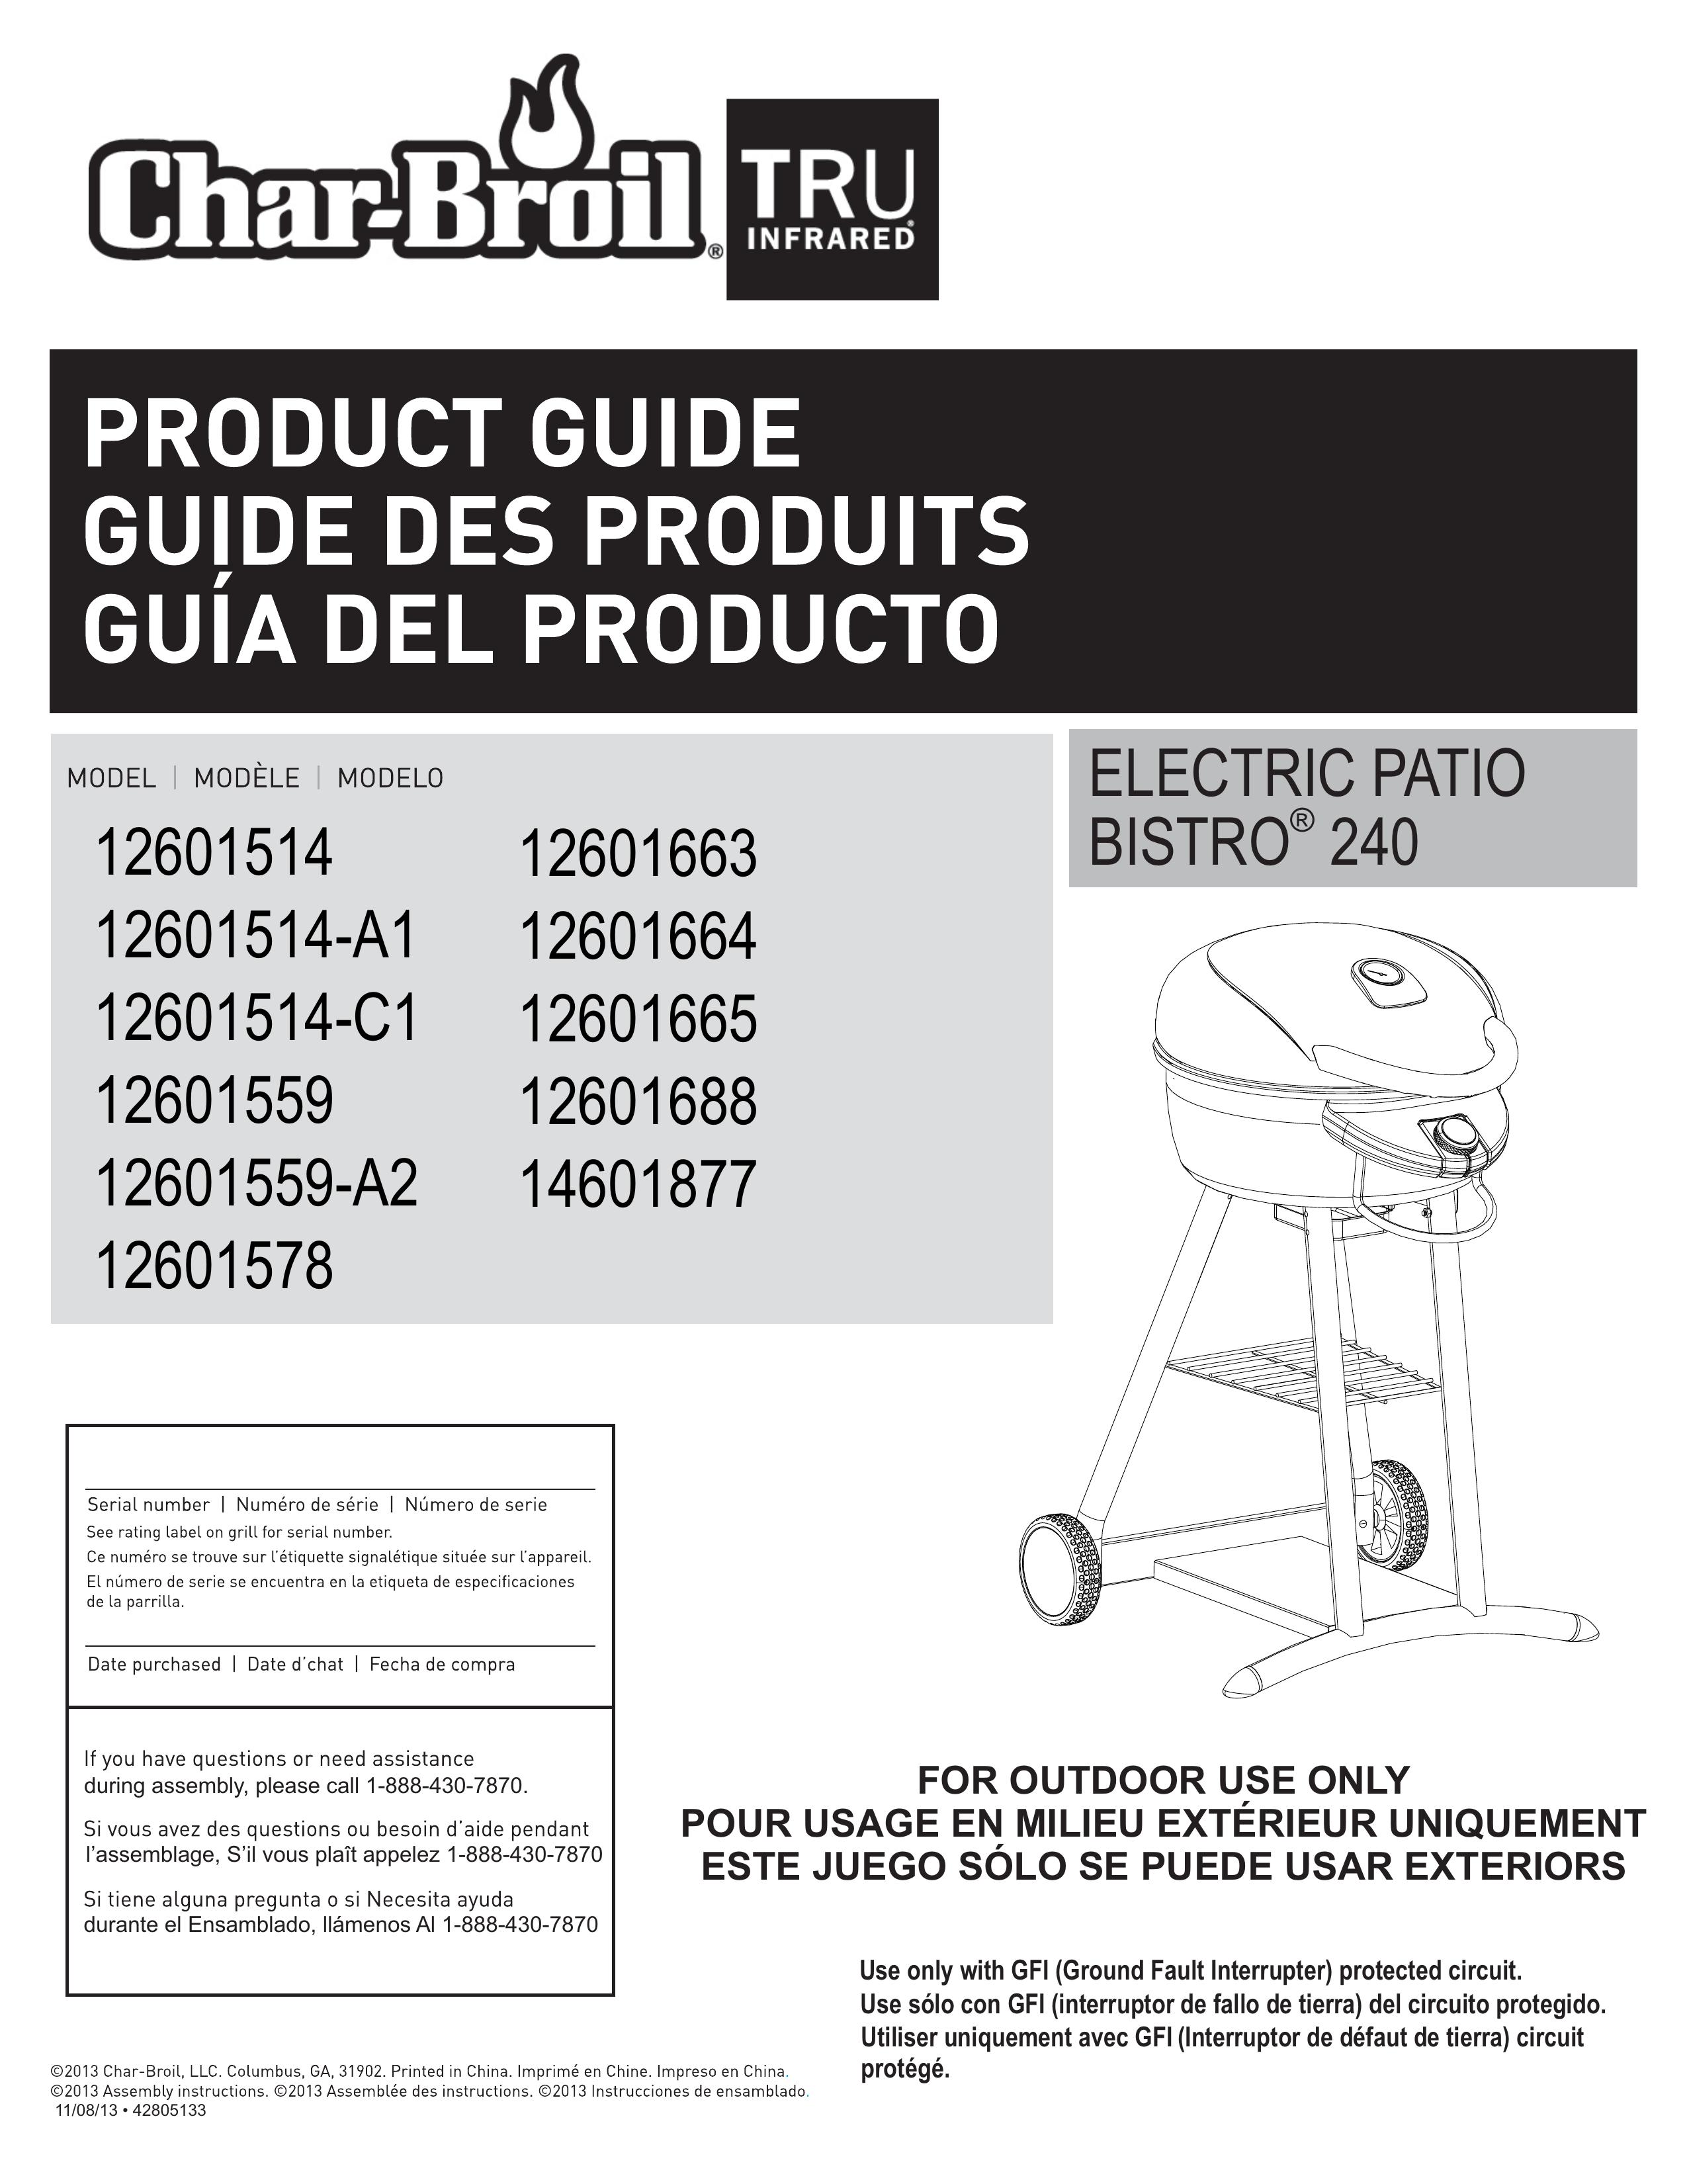 Char-Broil 12601559-A2 Electric Grill User Manual